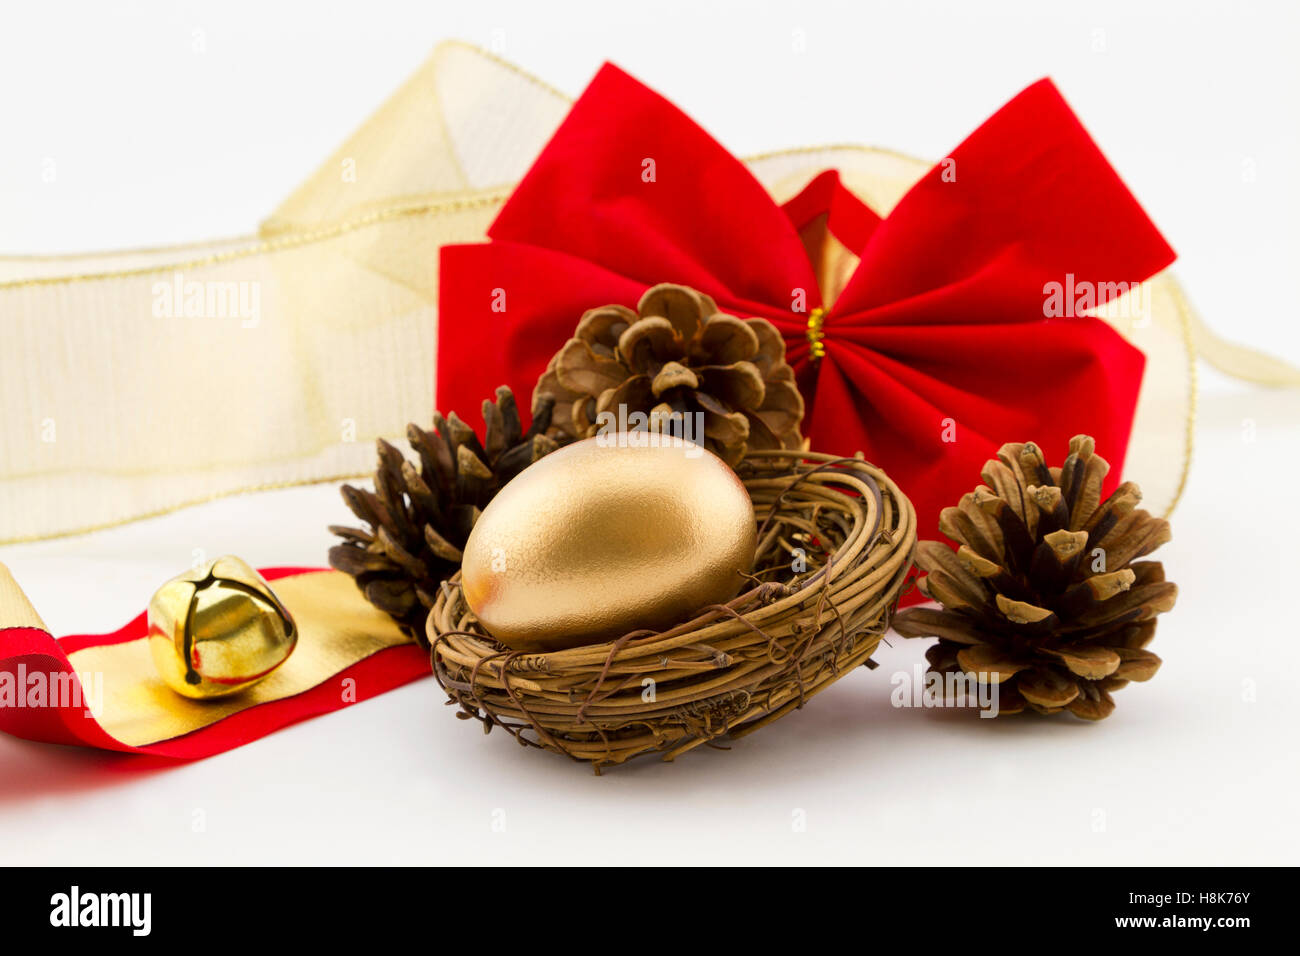 Gold nest egg surrounded by pine cones placed with red velvet bow and gold bell and ribbon.  Holiday financial gift is festive. Stock Photo